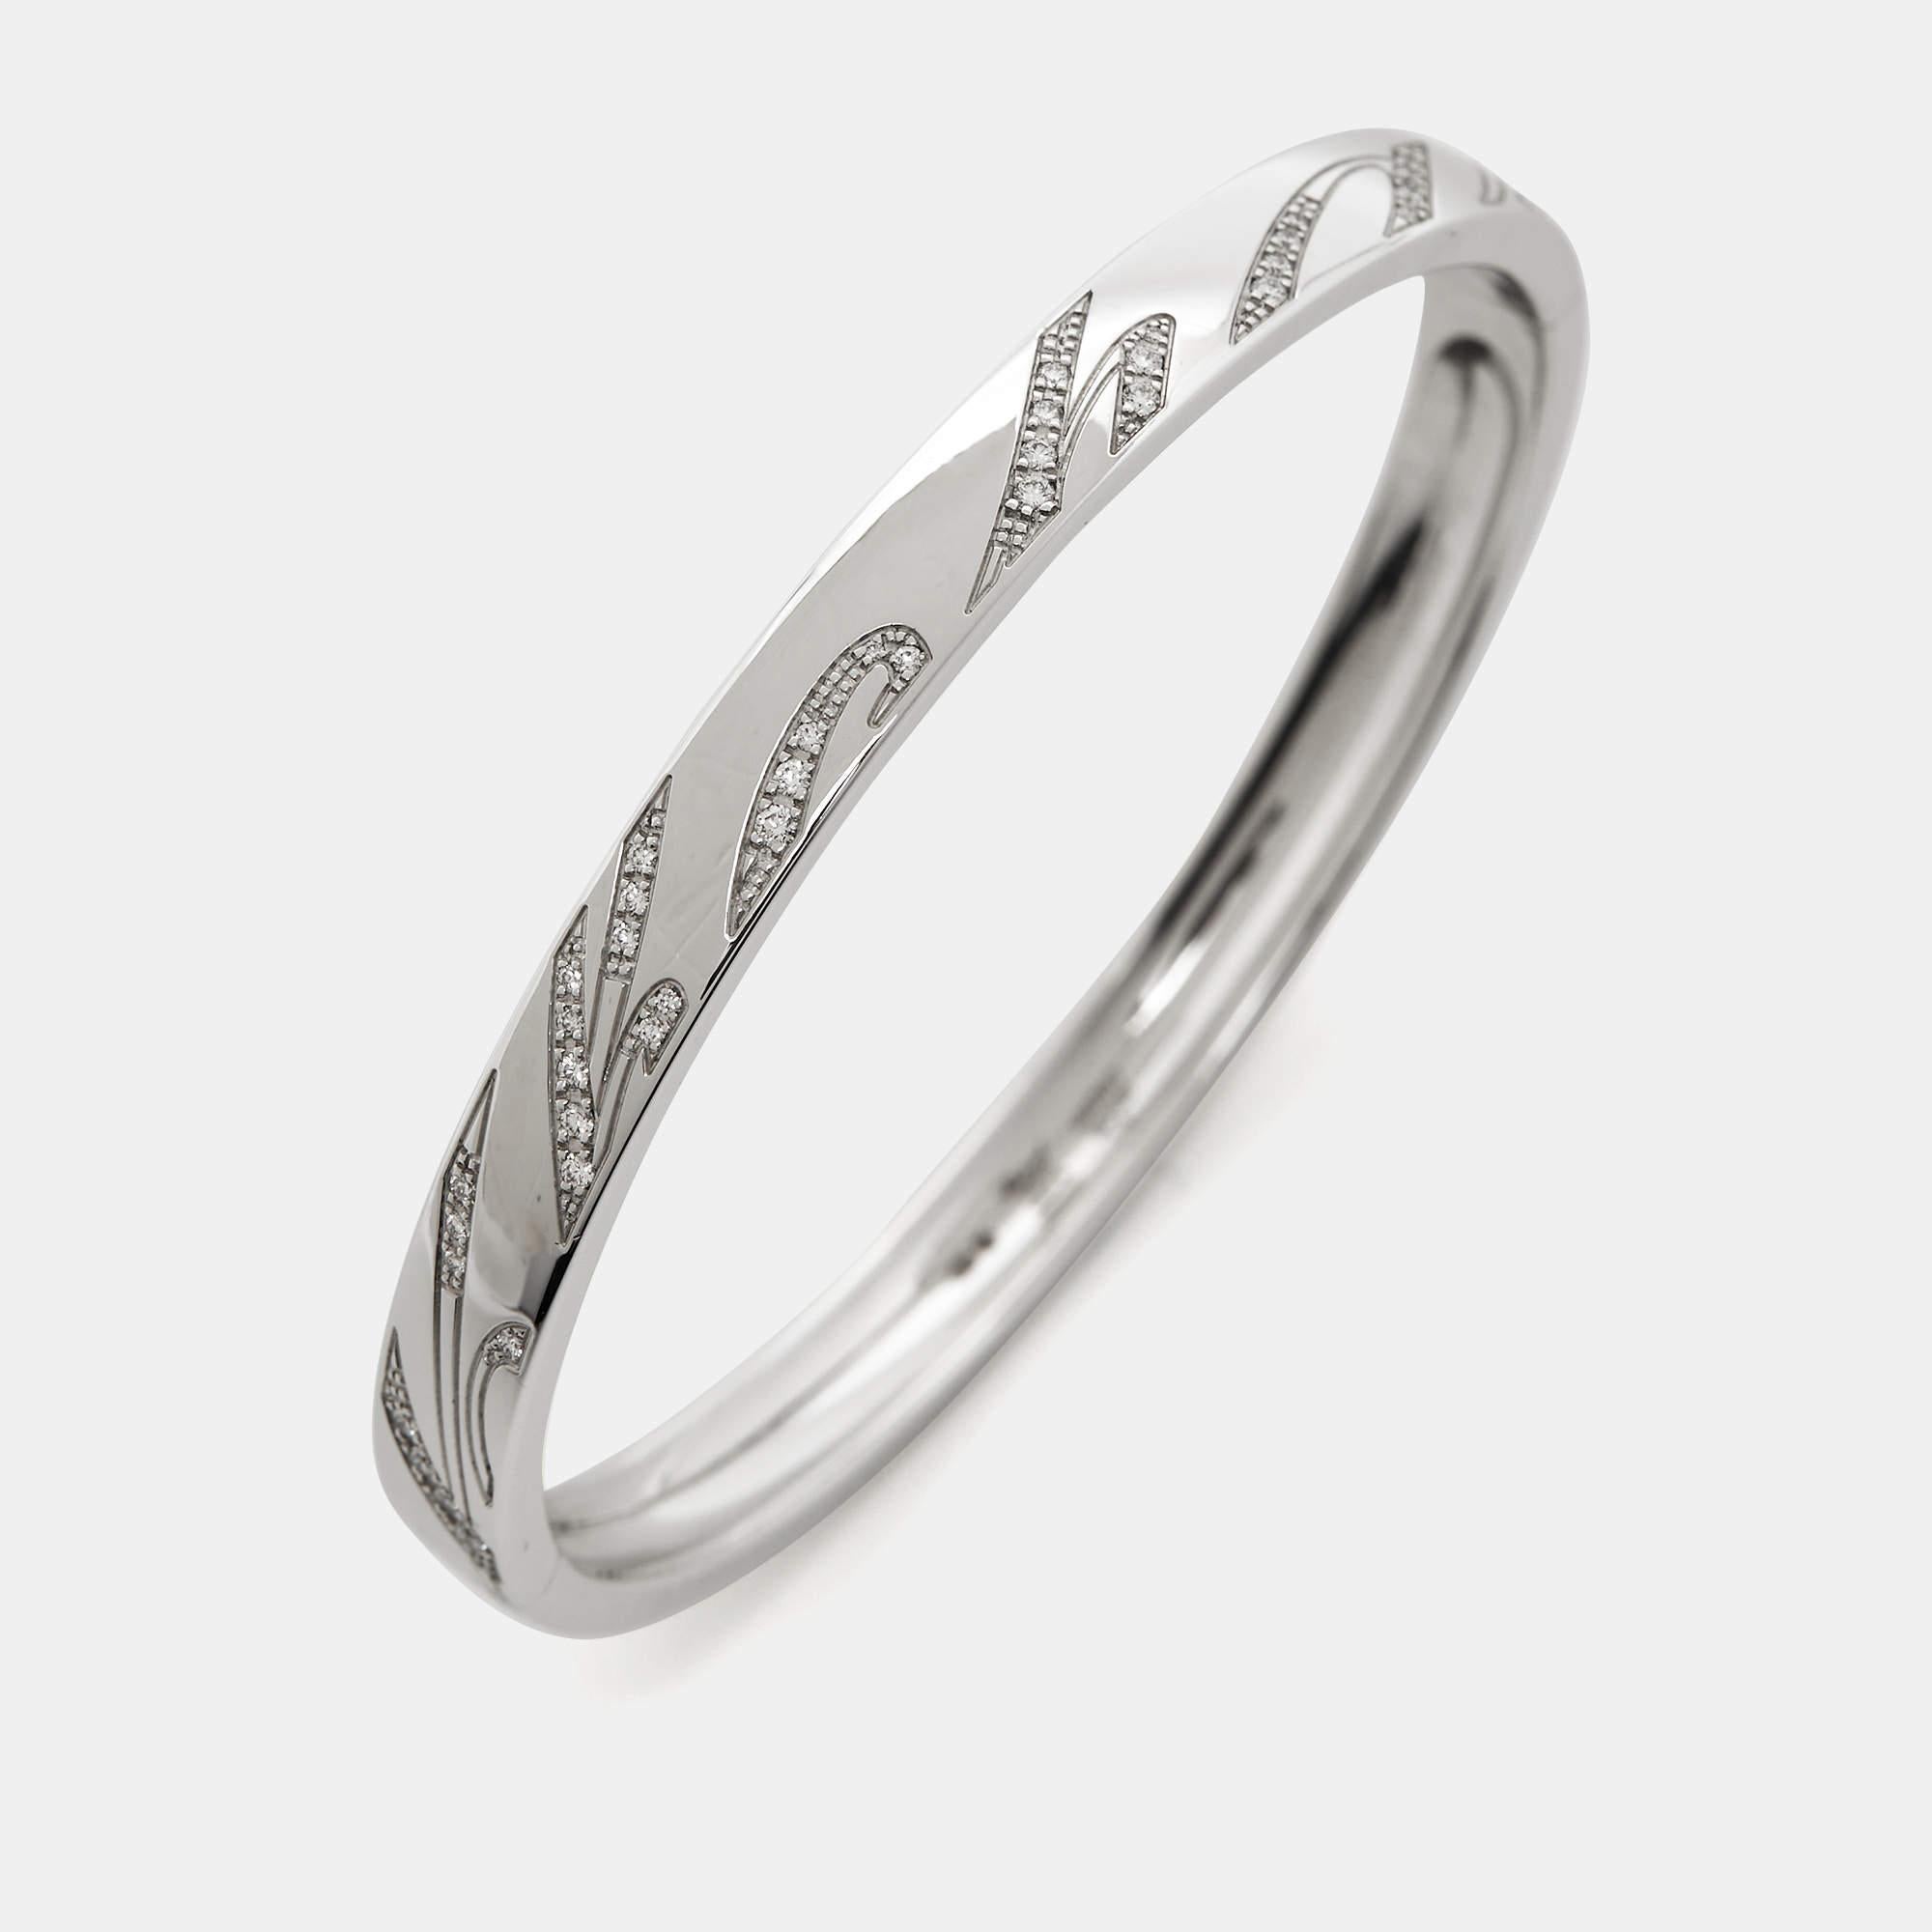 This creation from Chopard speaks luxury in a way that is minimal and elegant. The bracelet has been excellently crafted from 18k white gold in a bangle style. Set beautifully on the bracelet are cursive engravings of the brand's name—a signature of